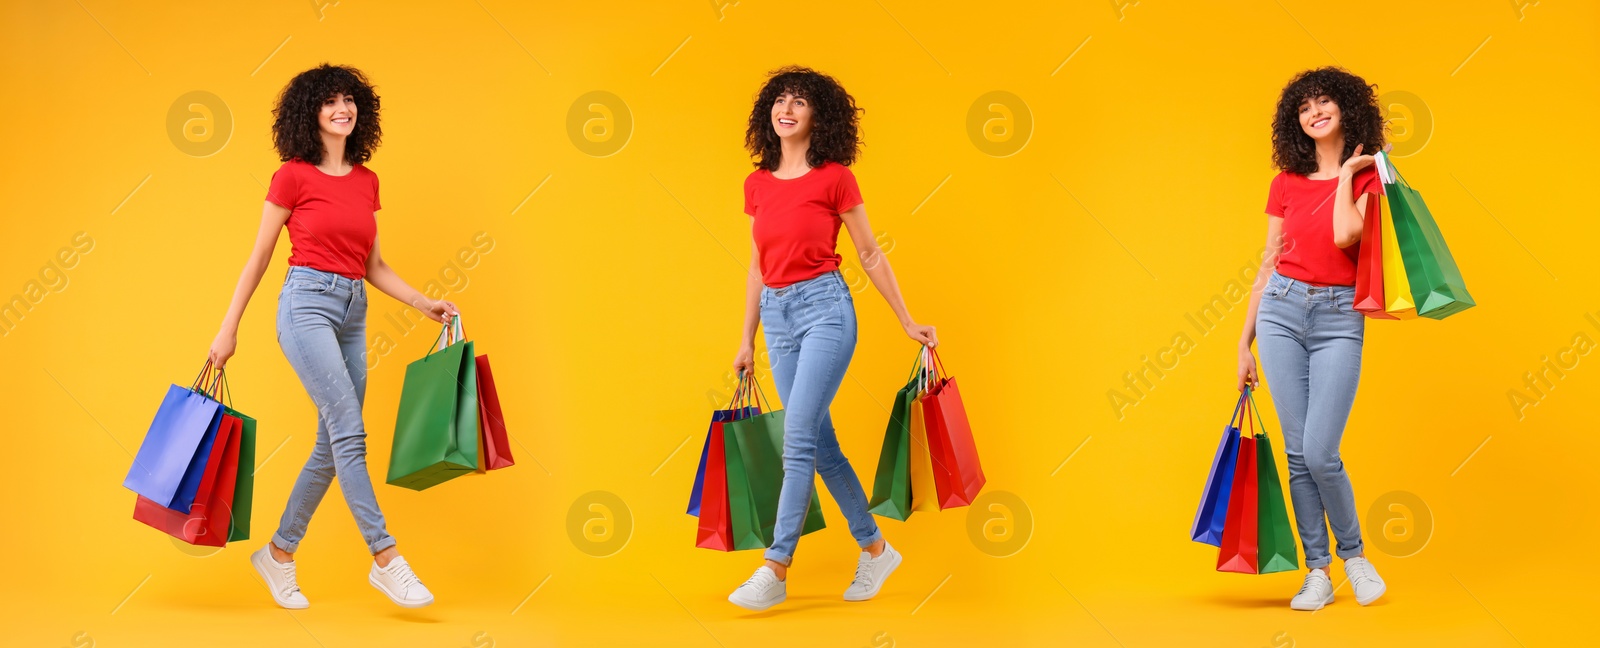 Image of Happy woman with shopping bags on orange background, set with photos